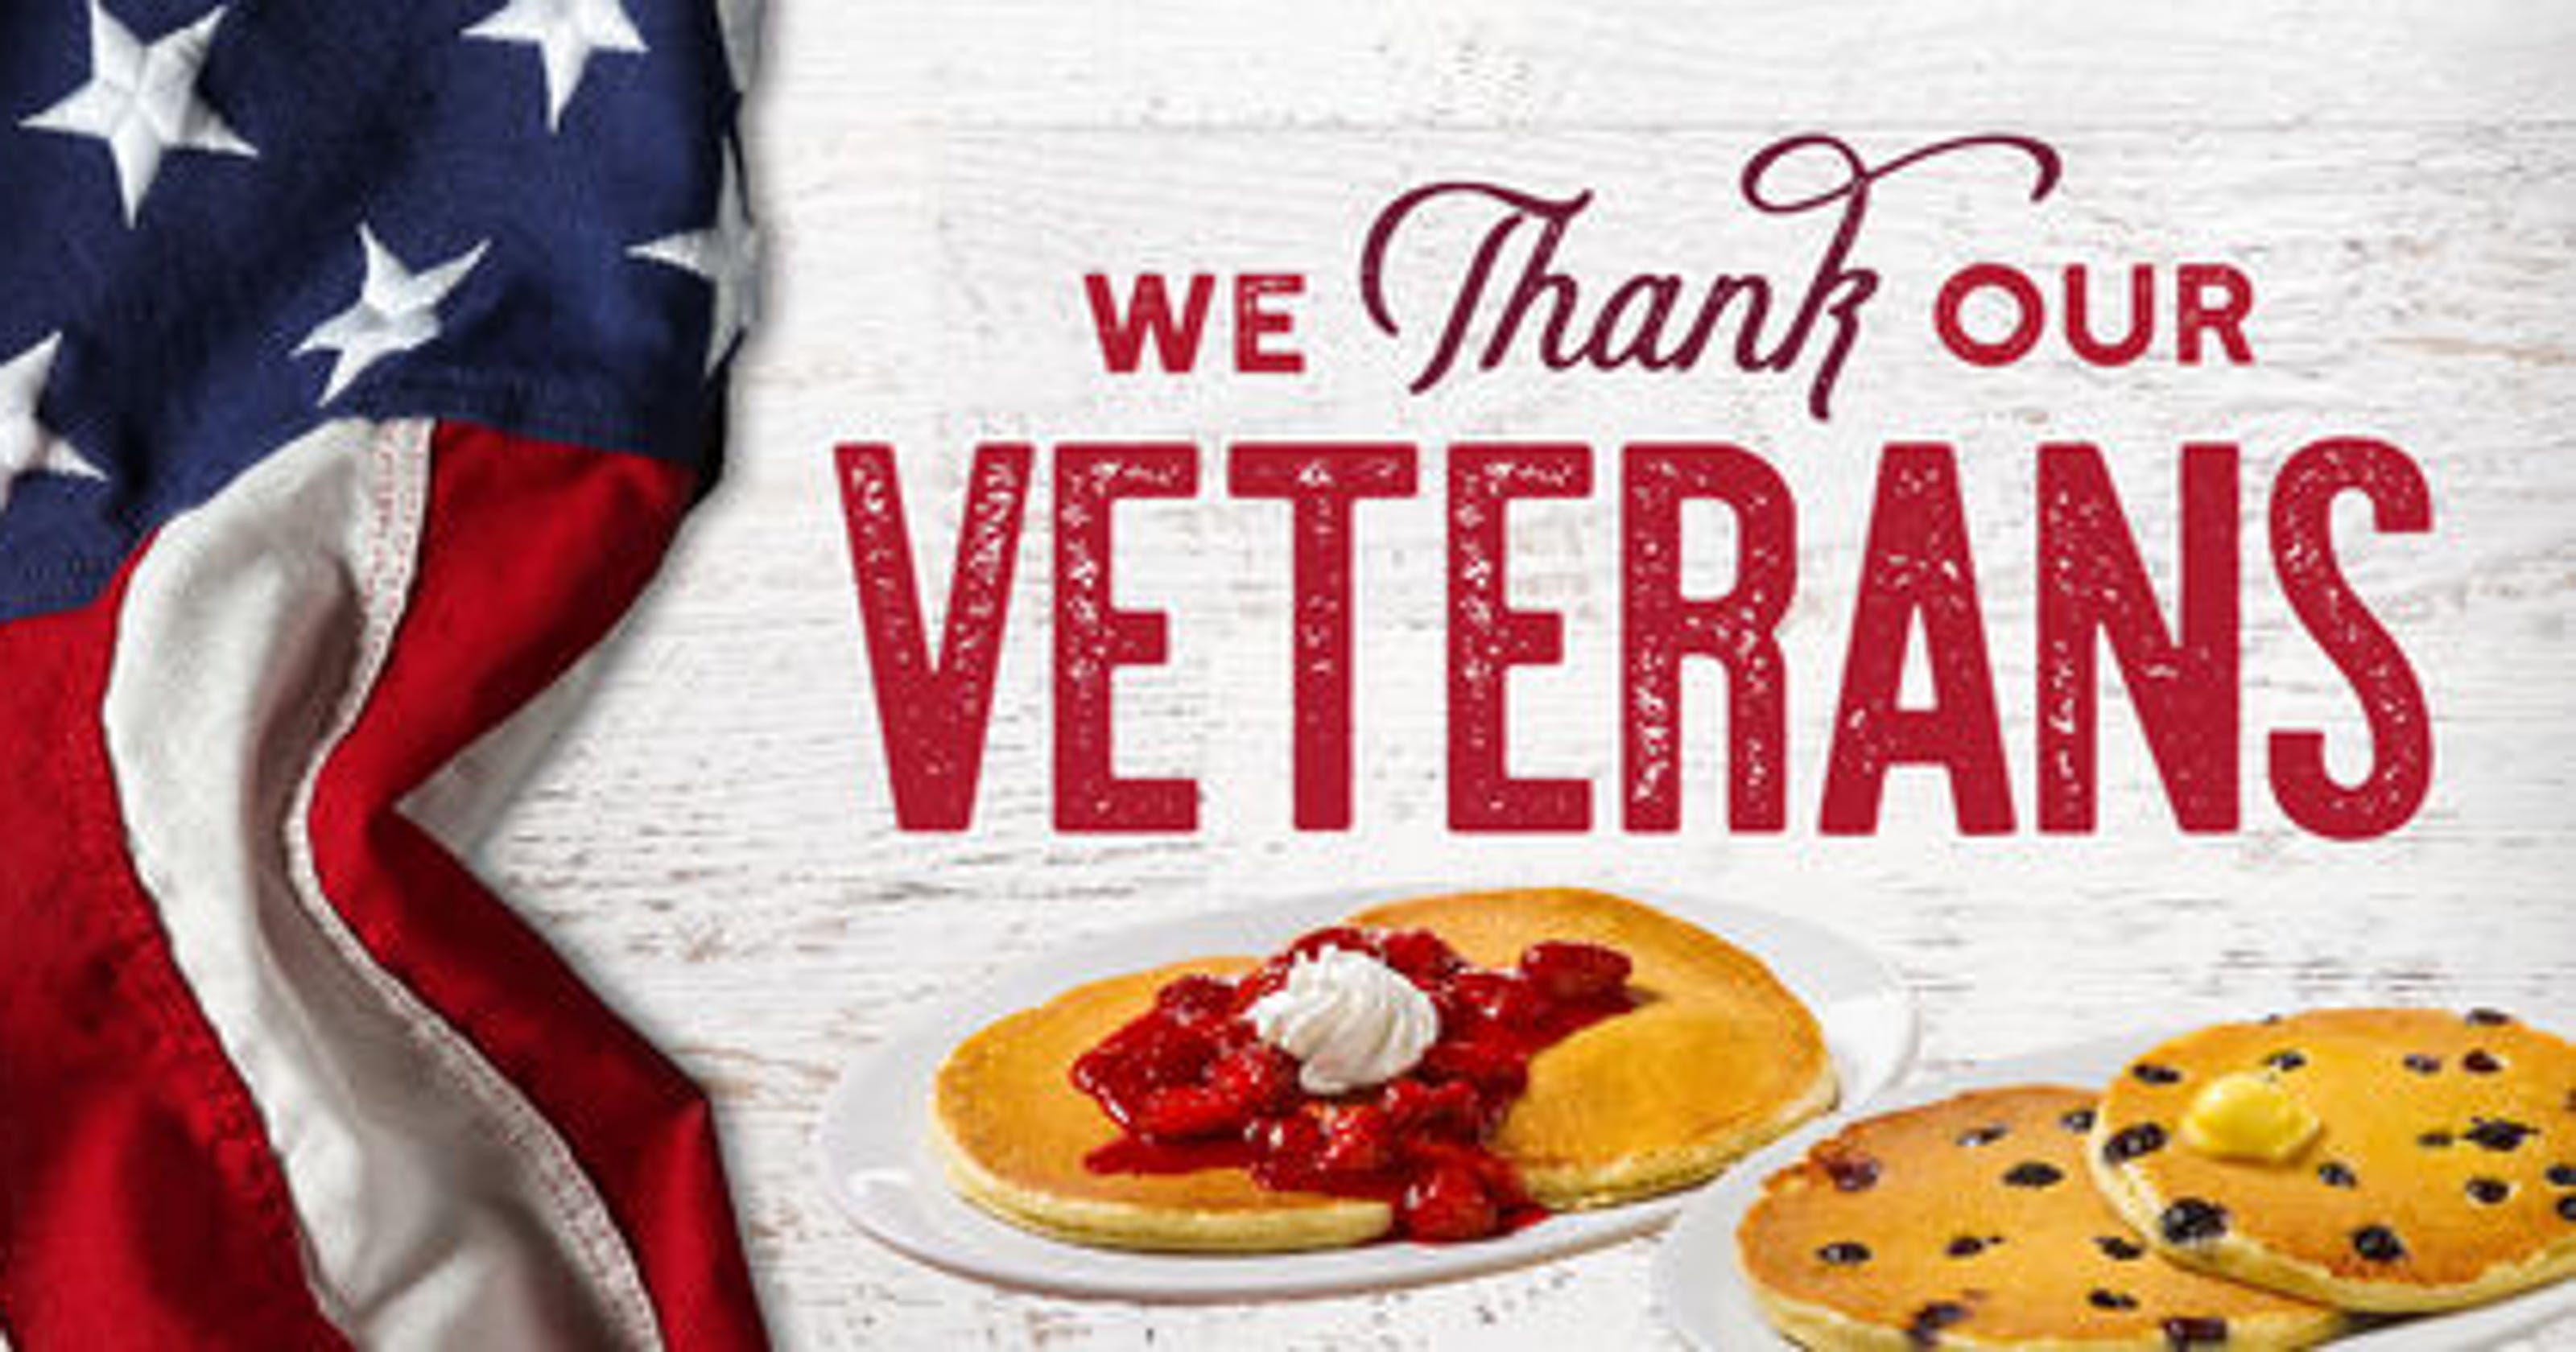 Places That Have Free Food On Veterans Day